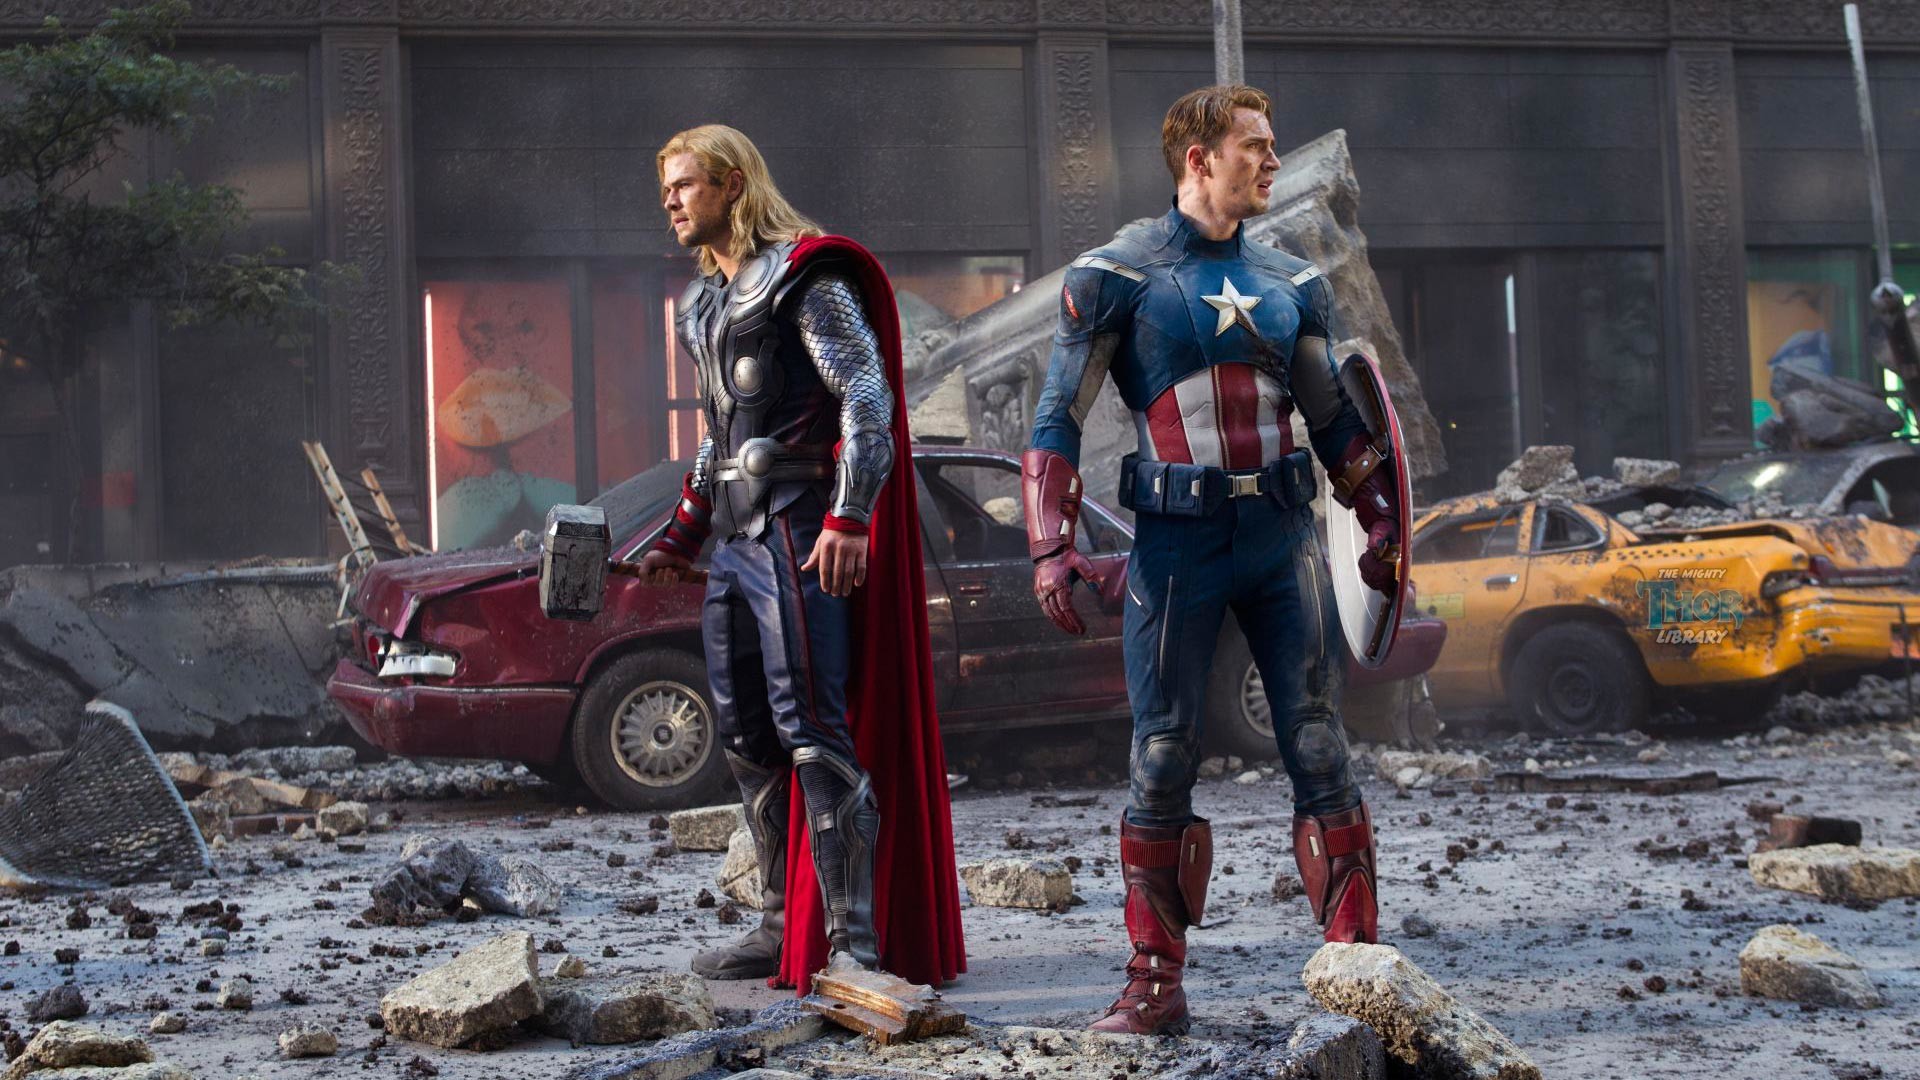 1920x1080 Thor and captain america in avengers movie  wallpaper.